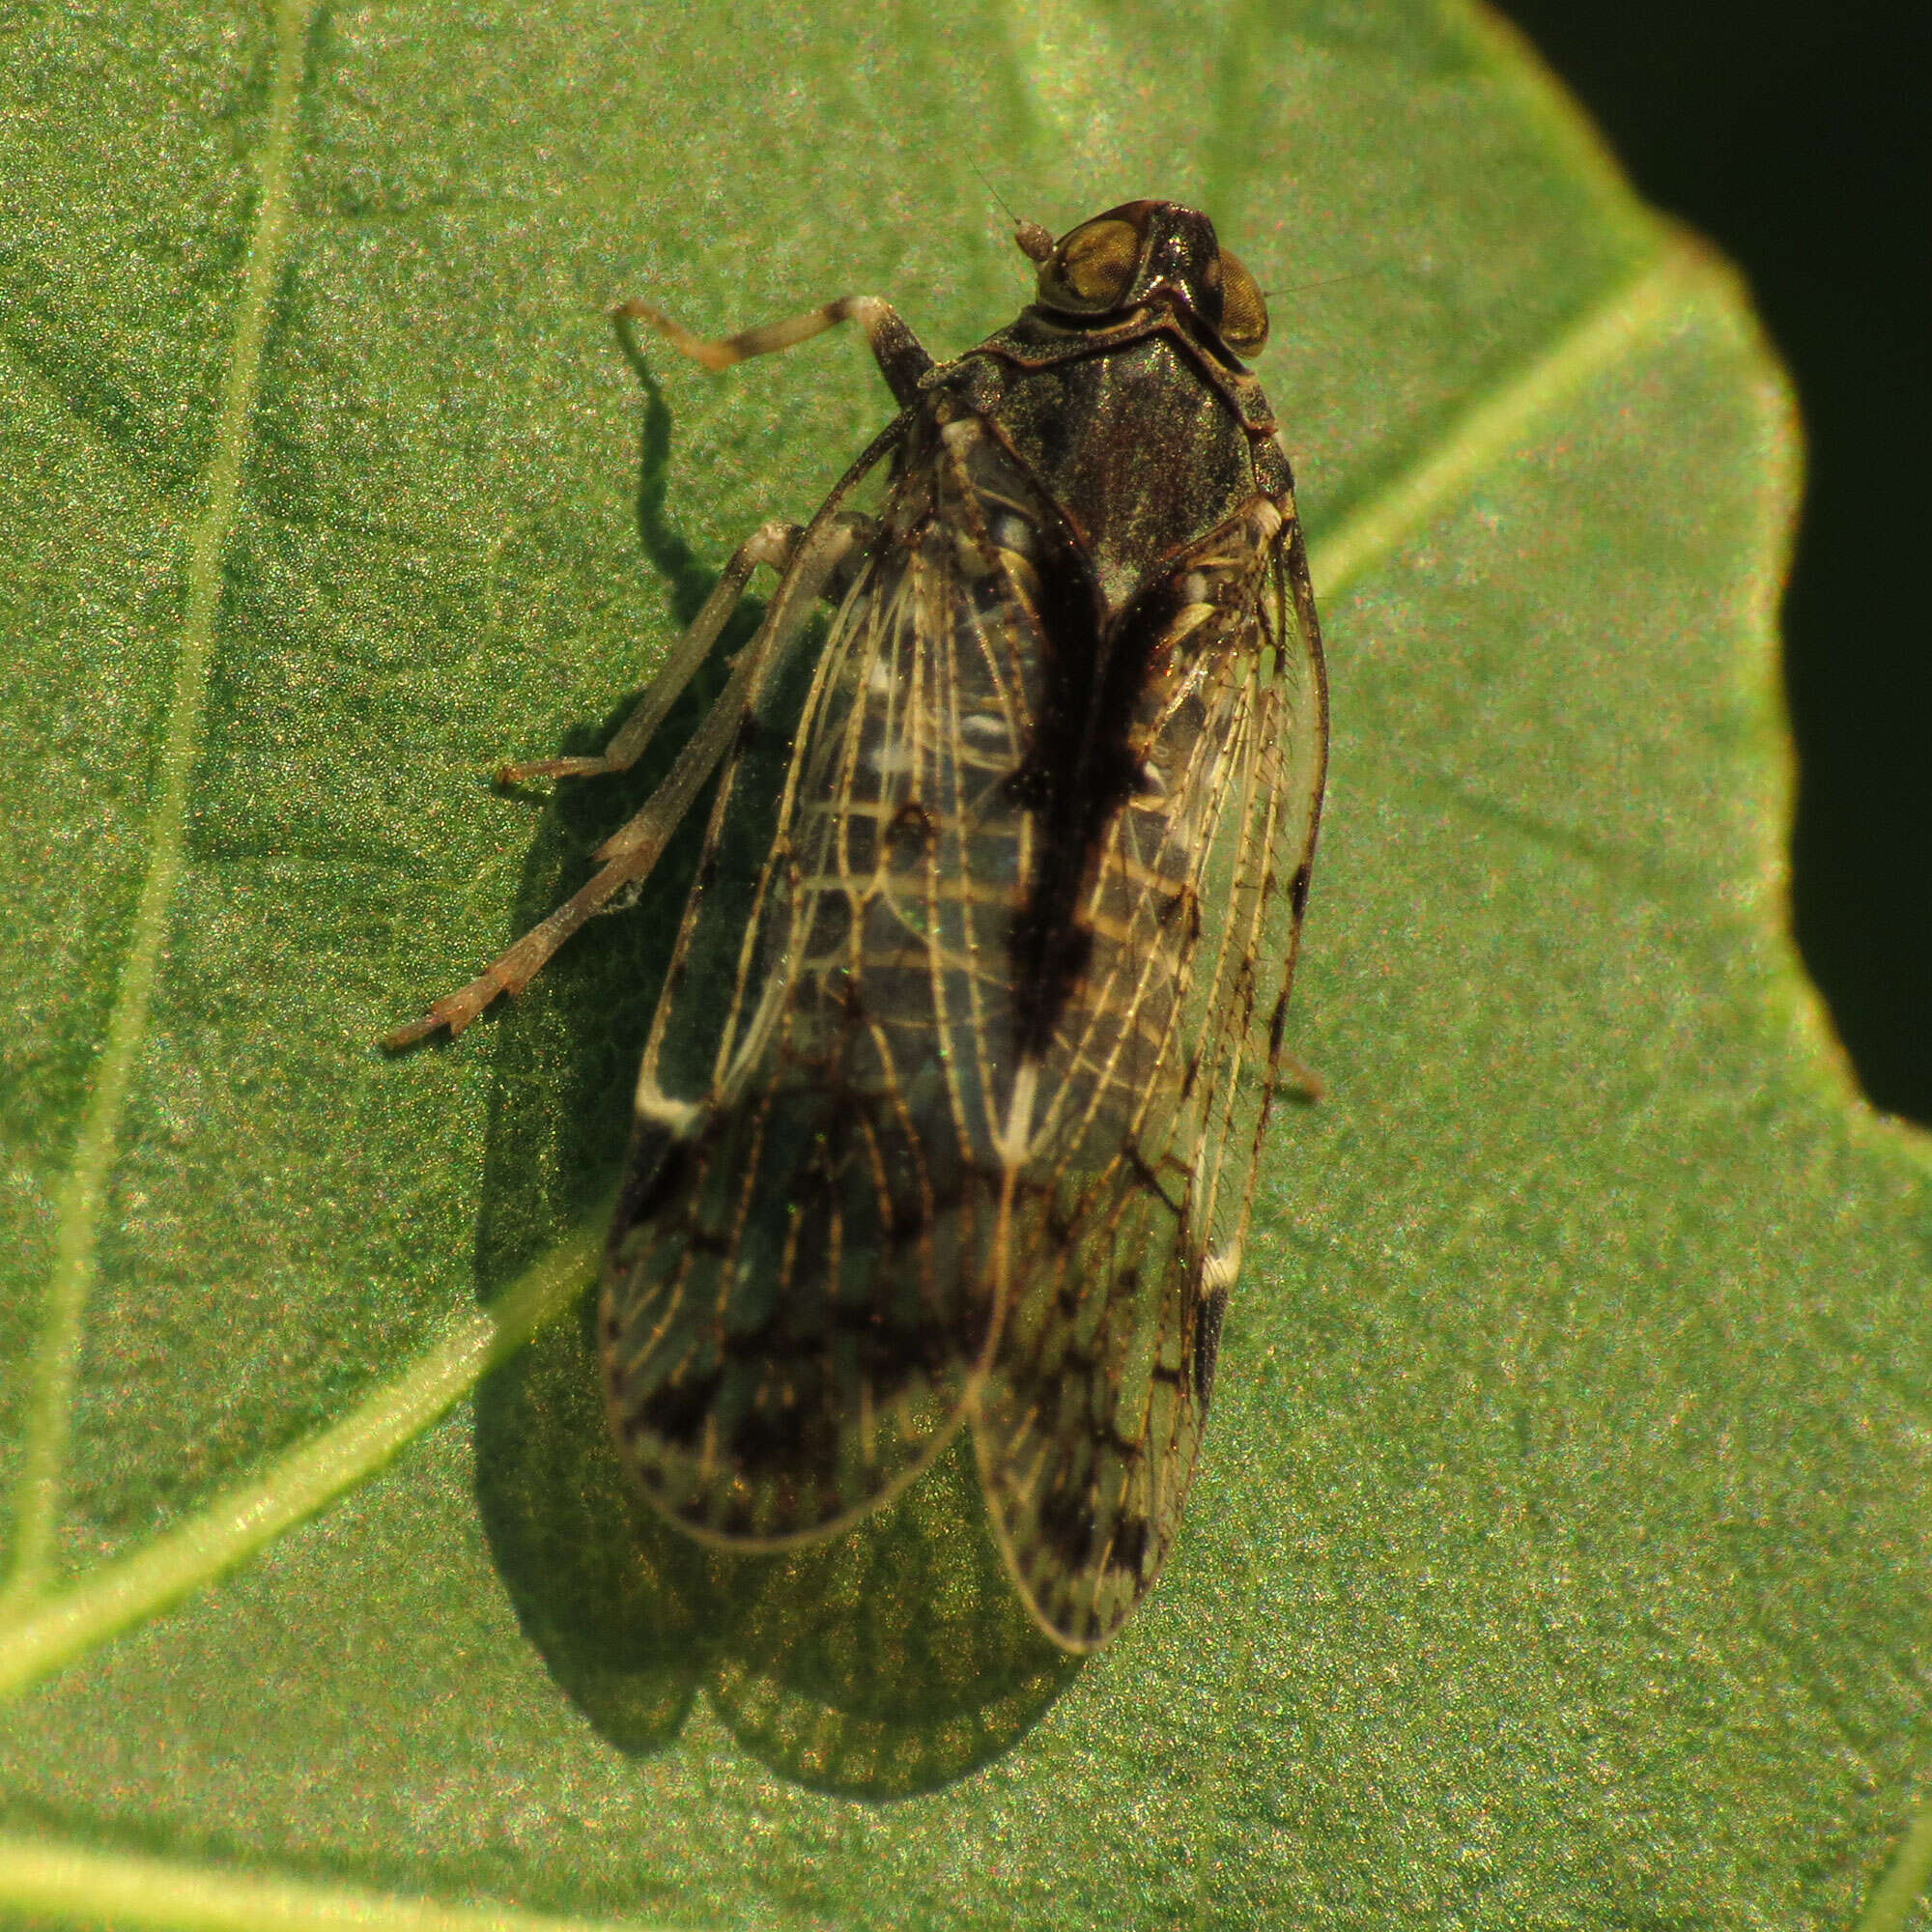 Image of cixiid planthoppers